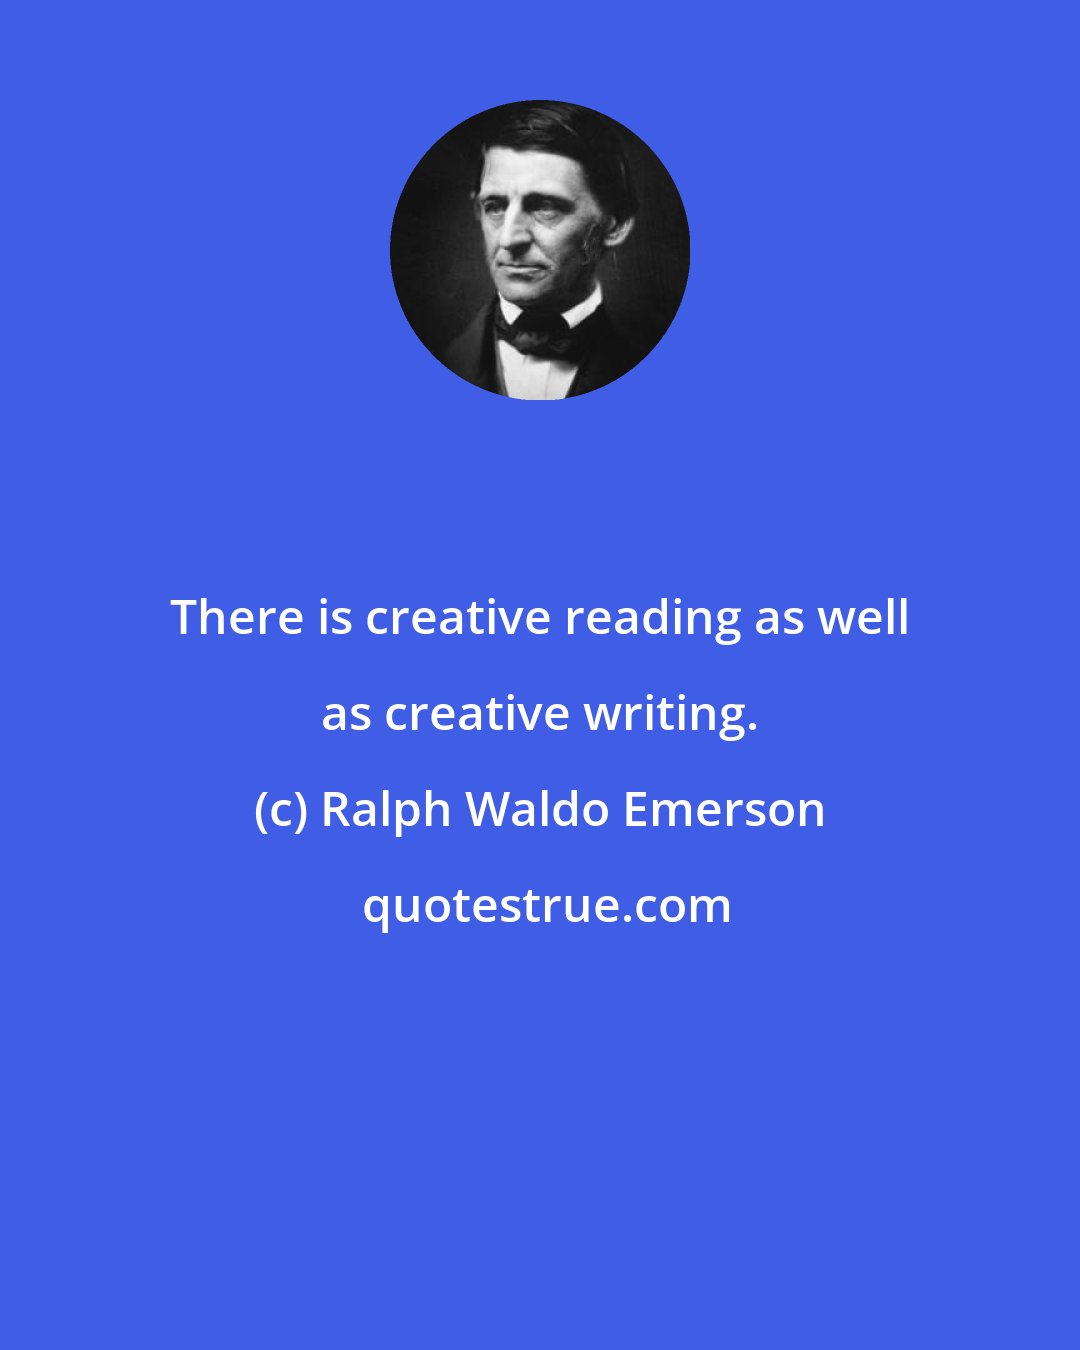 Ralph Waldo Emerson: There is creative reading as well as creative writing.